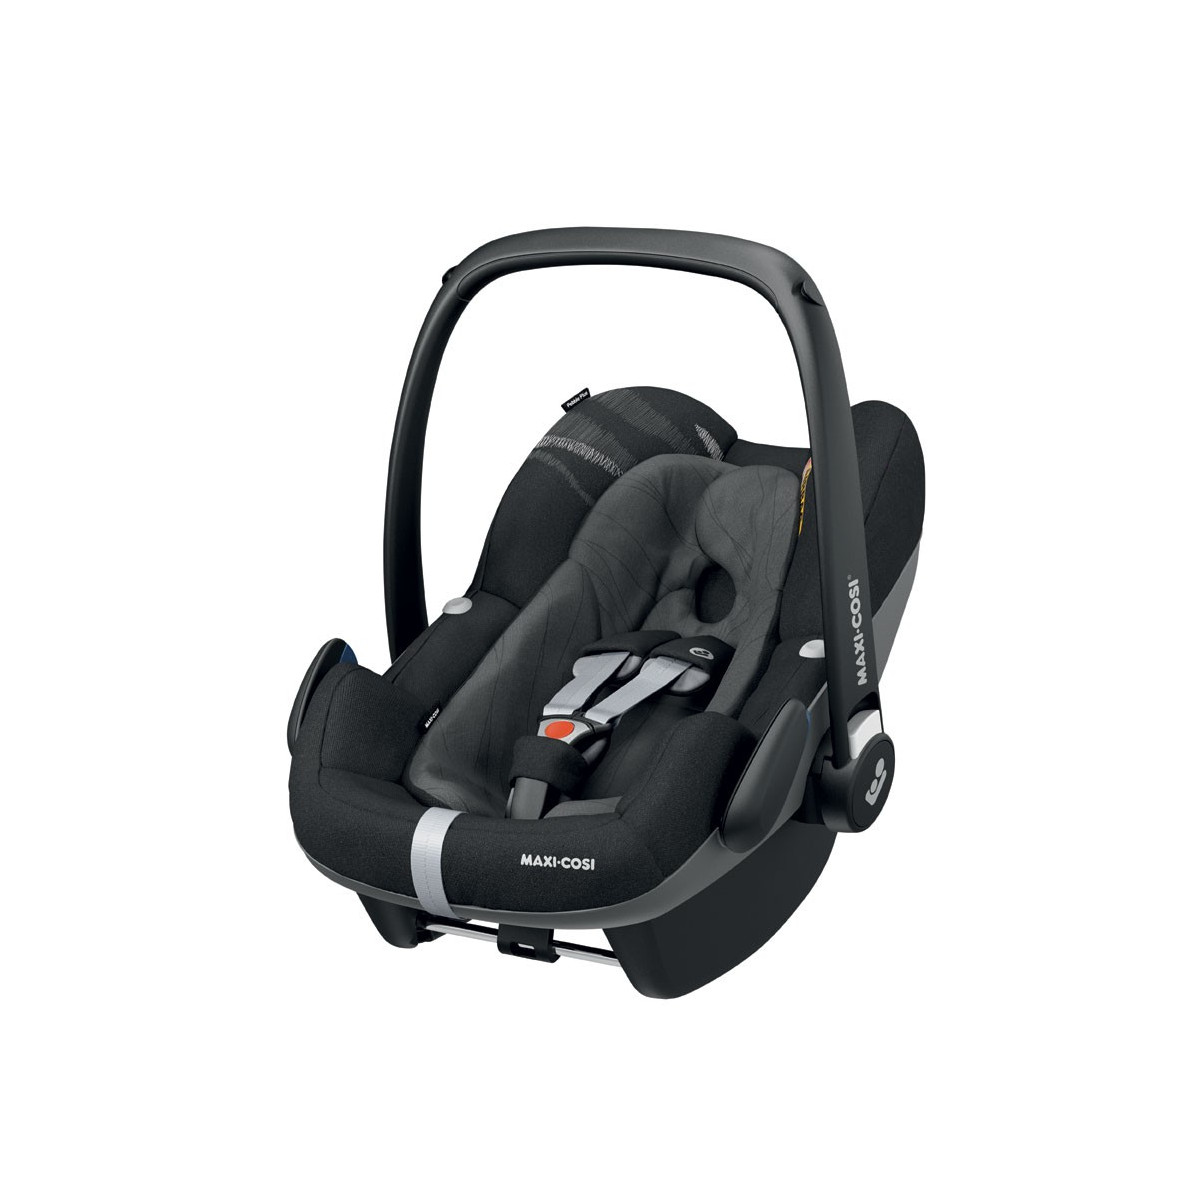 Maxi Cosi Pebble Plus Group 0 Car Seat Frequency Black - Maxi Cosi Pebble Plus Car Seat With Isofix